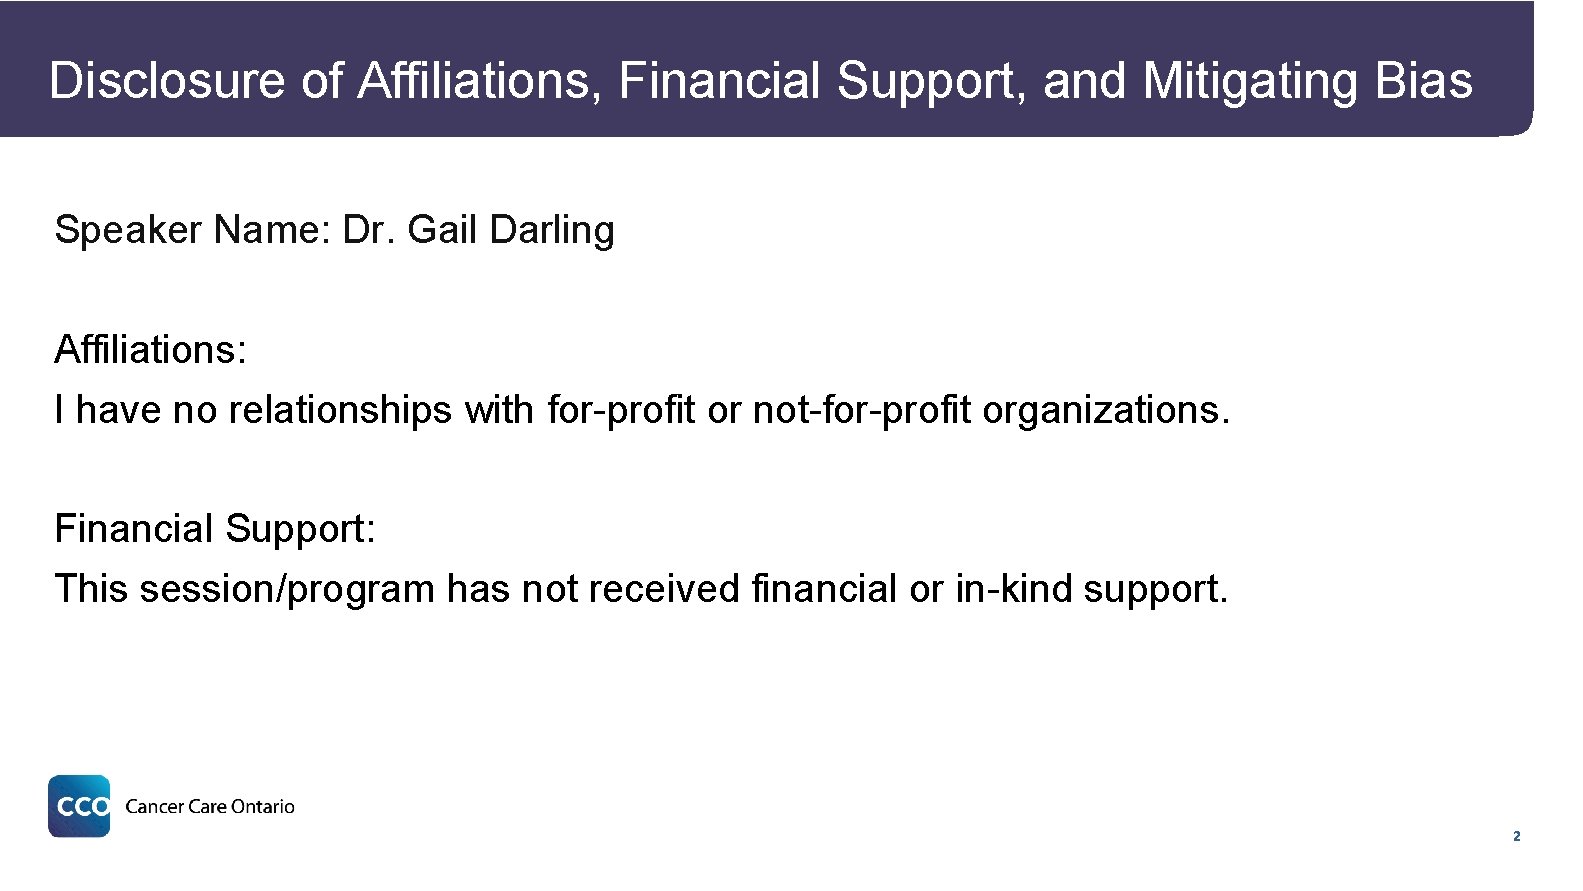 Disclosure of Affiliations, Financial Support, and Mitigating Bias Speaker Name: Dr. Gail Darling Affiliations: